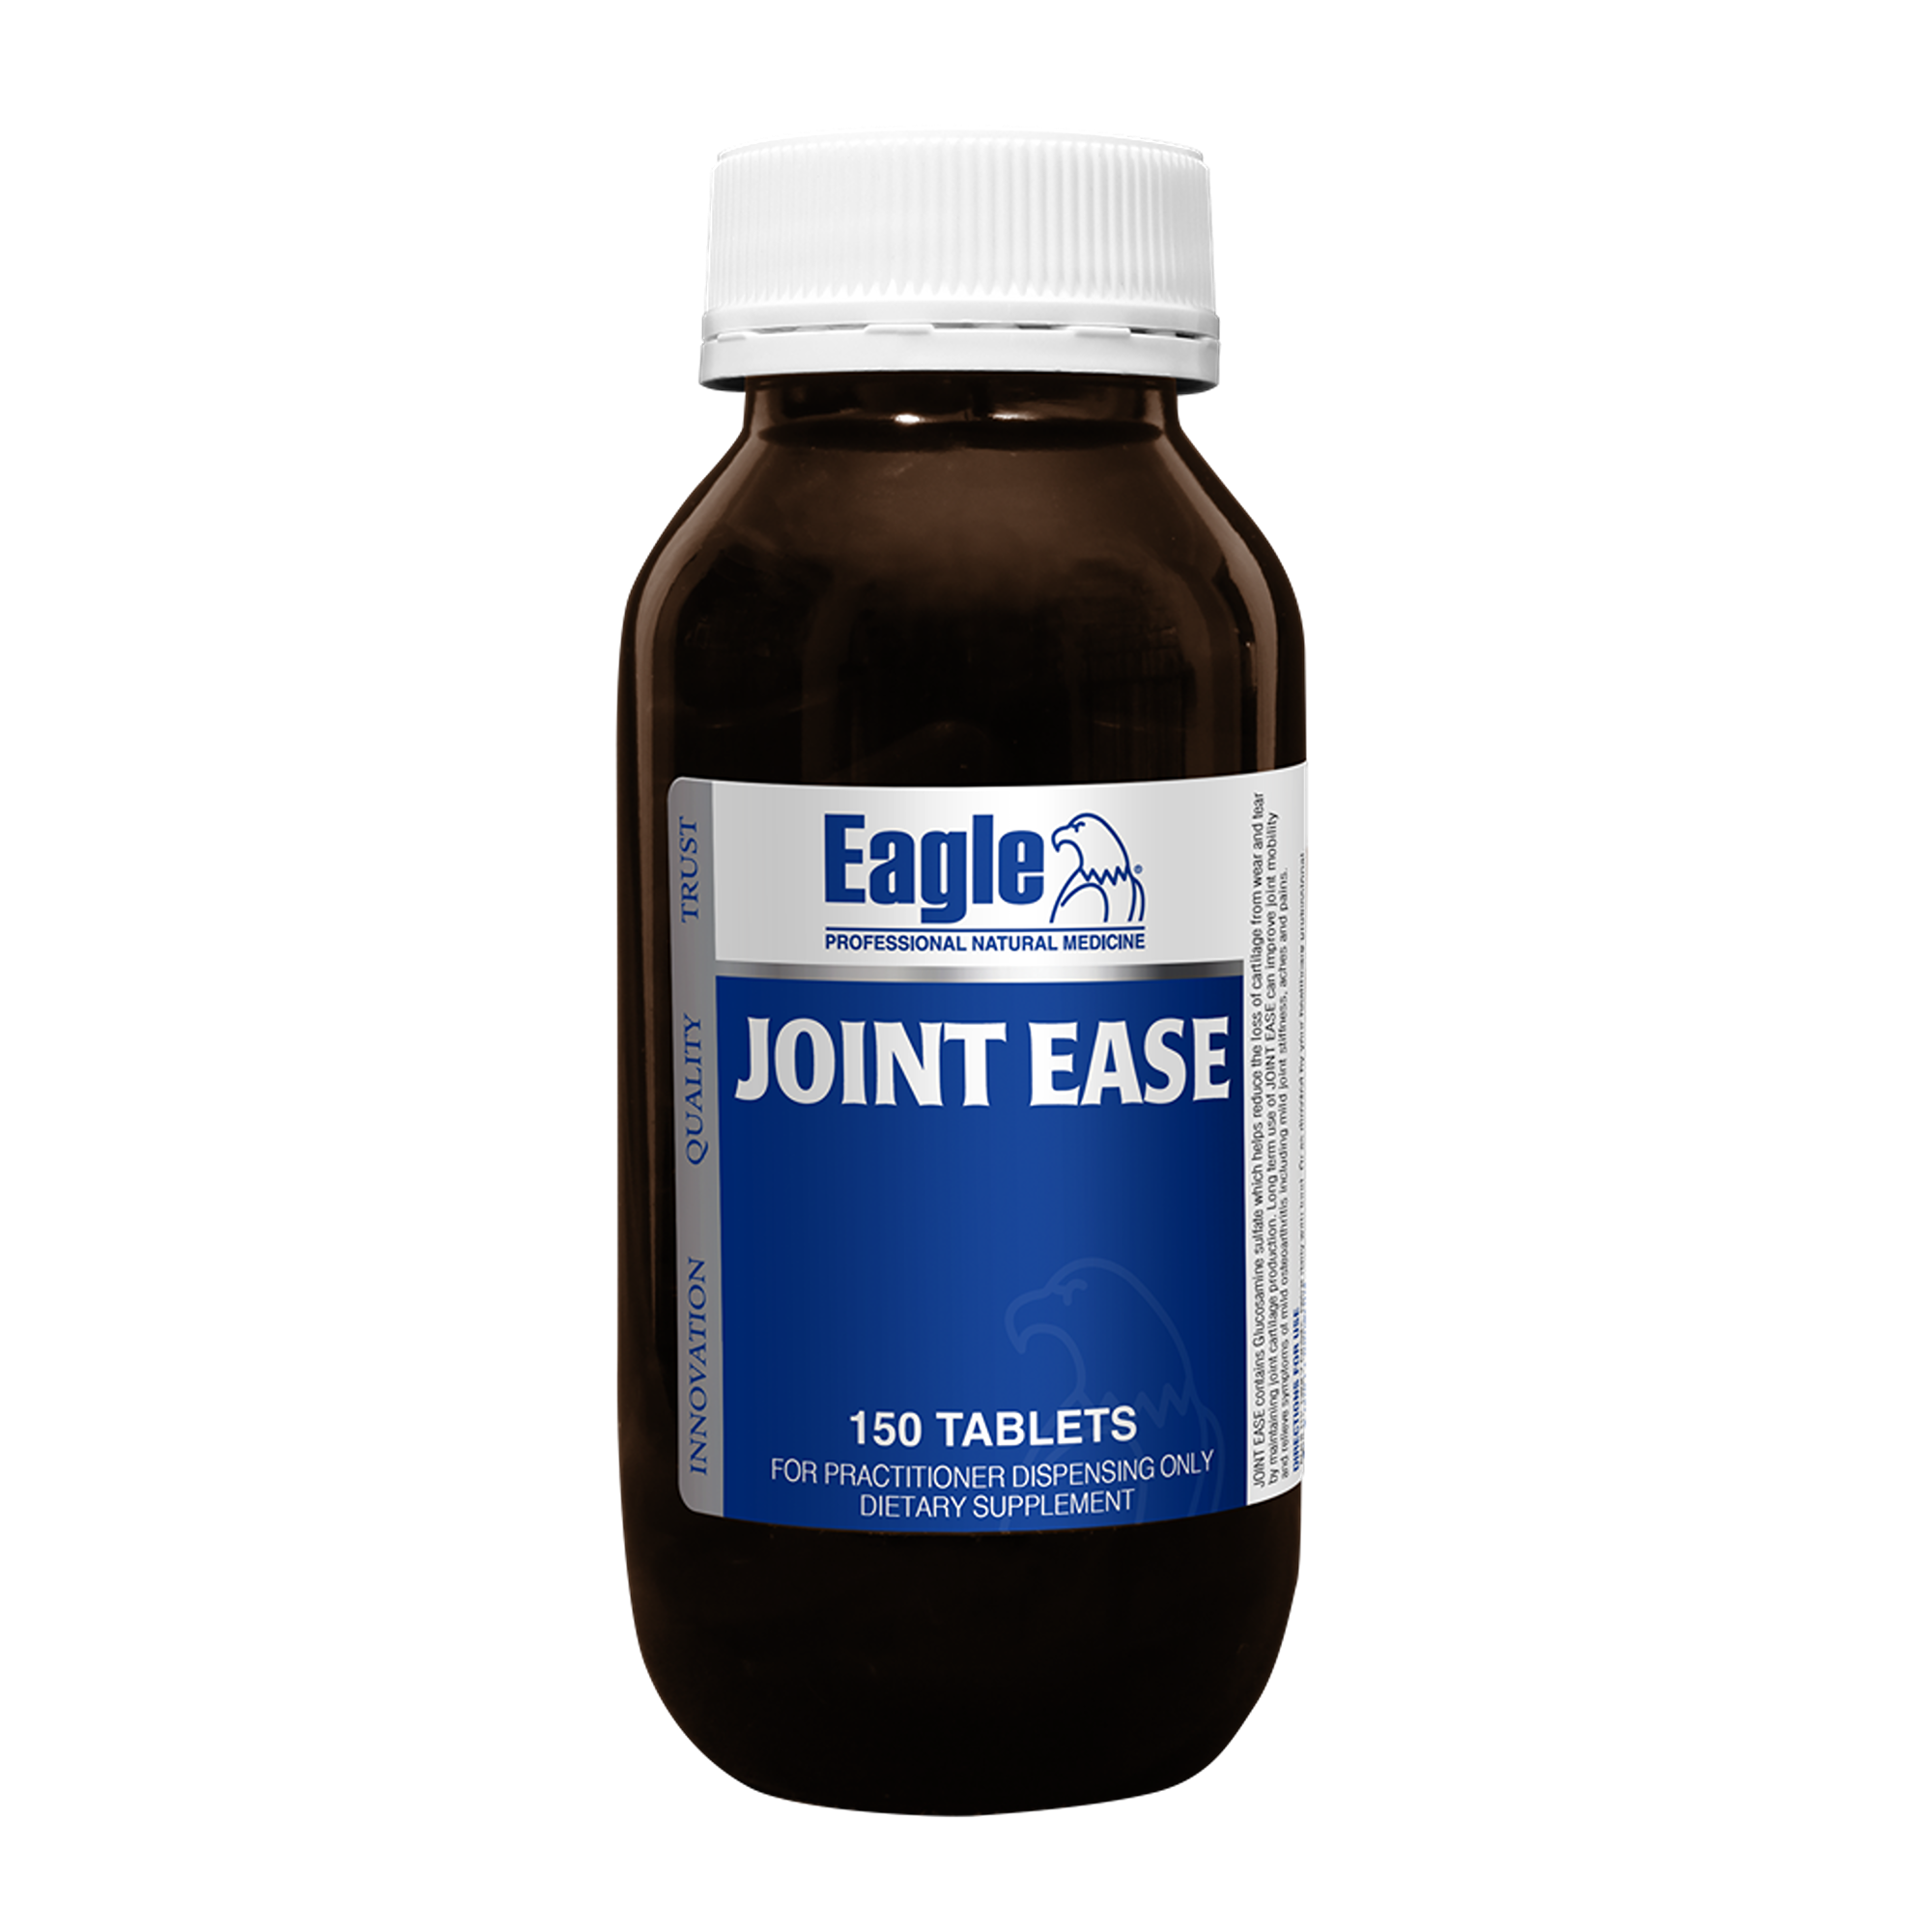 Eagle Joint Ease tablets 150s